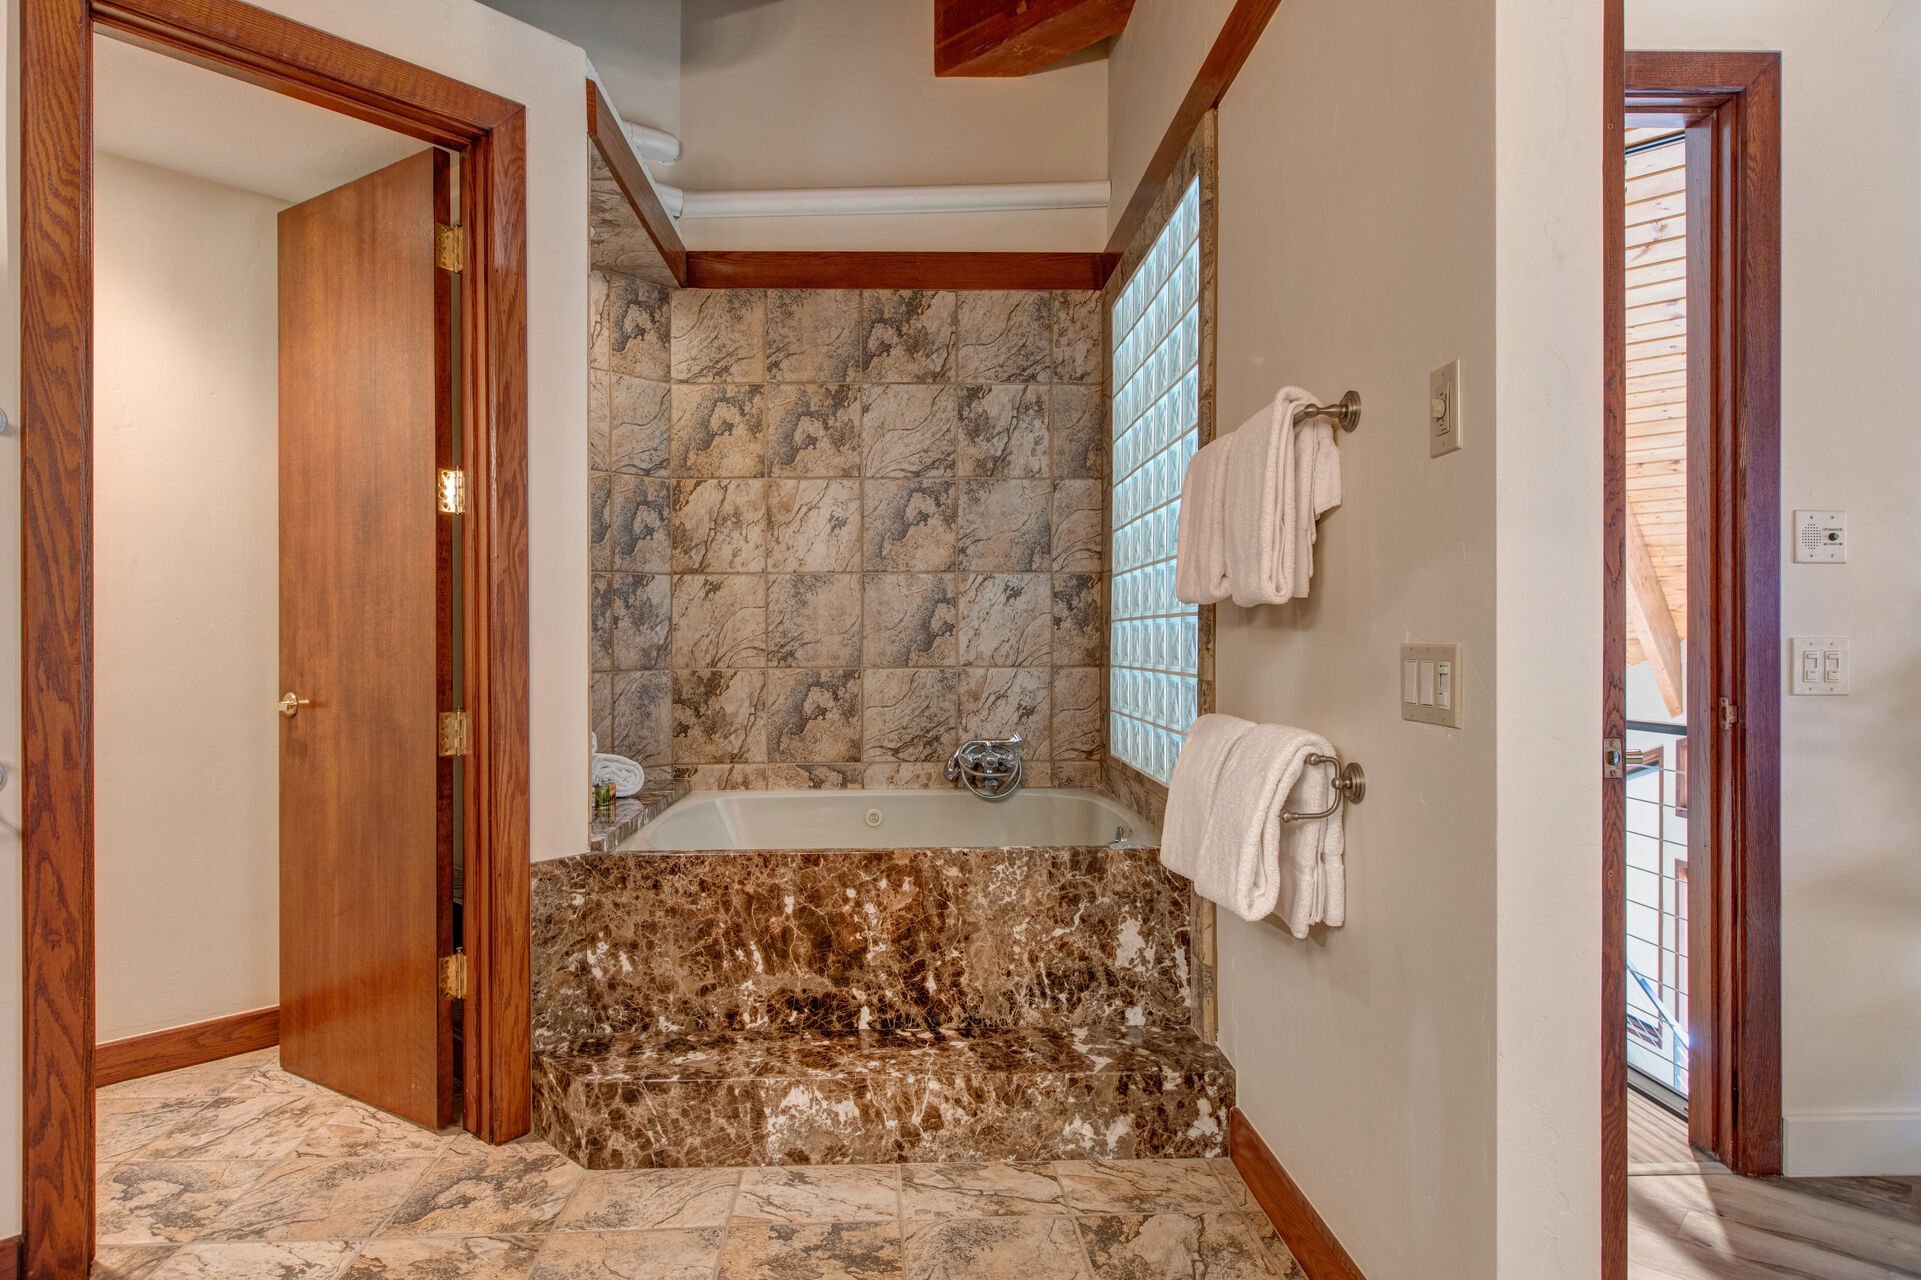 Grand Master Bathroom with dual vanities, beautiful stonework, tile & glass shower, and large jetted soaking tub